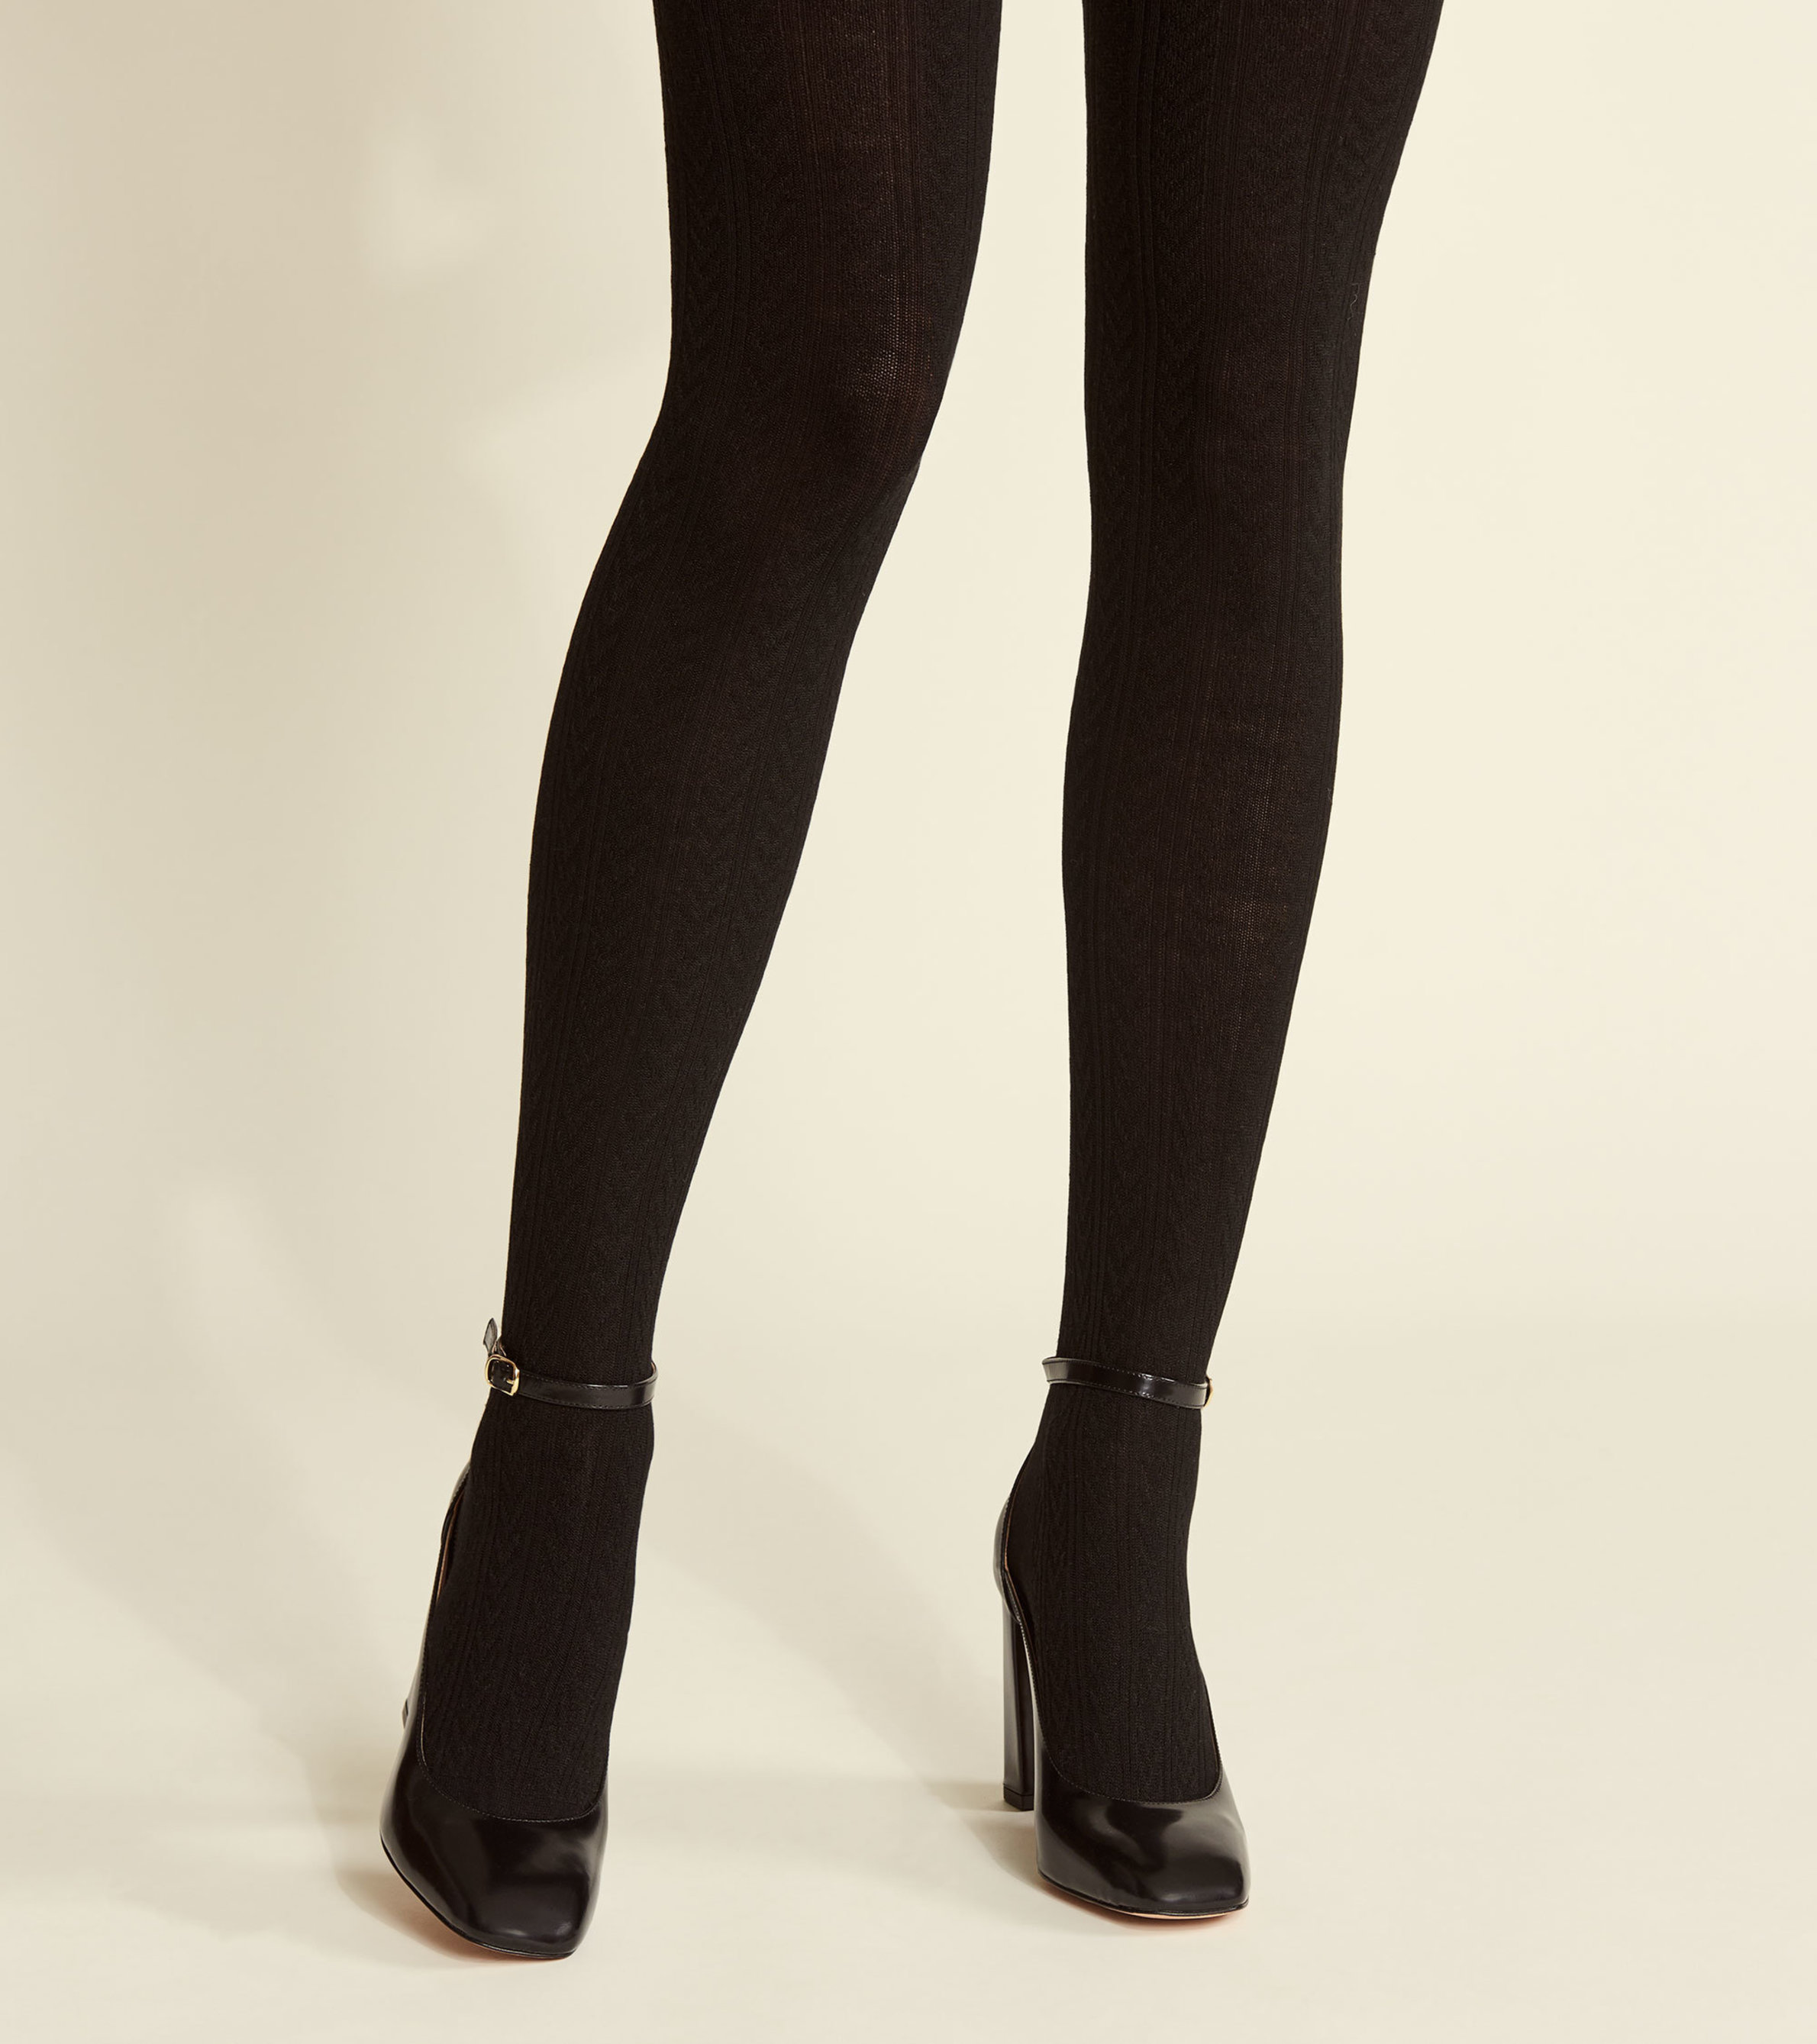 My Accessories London cable knit tights in black